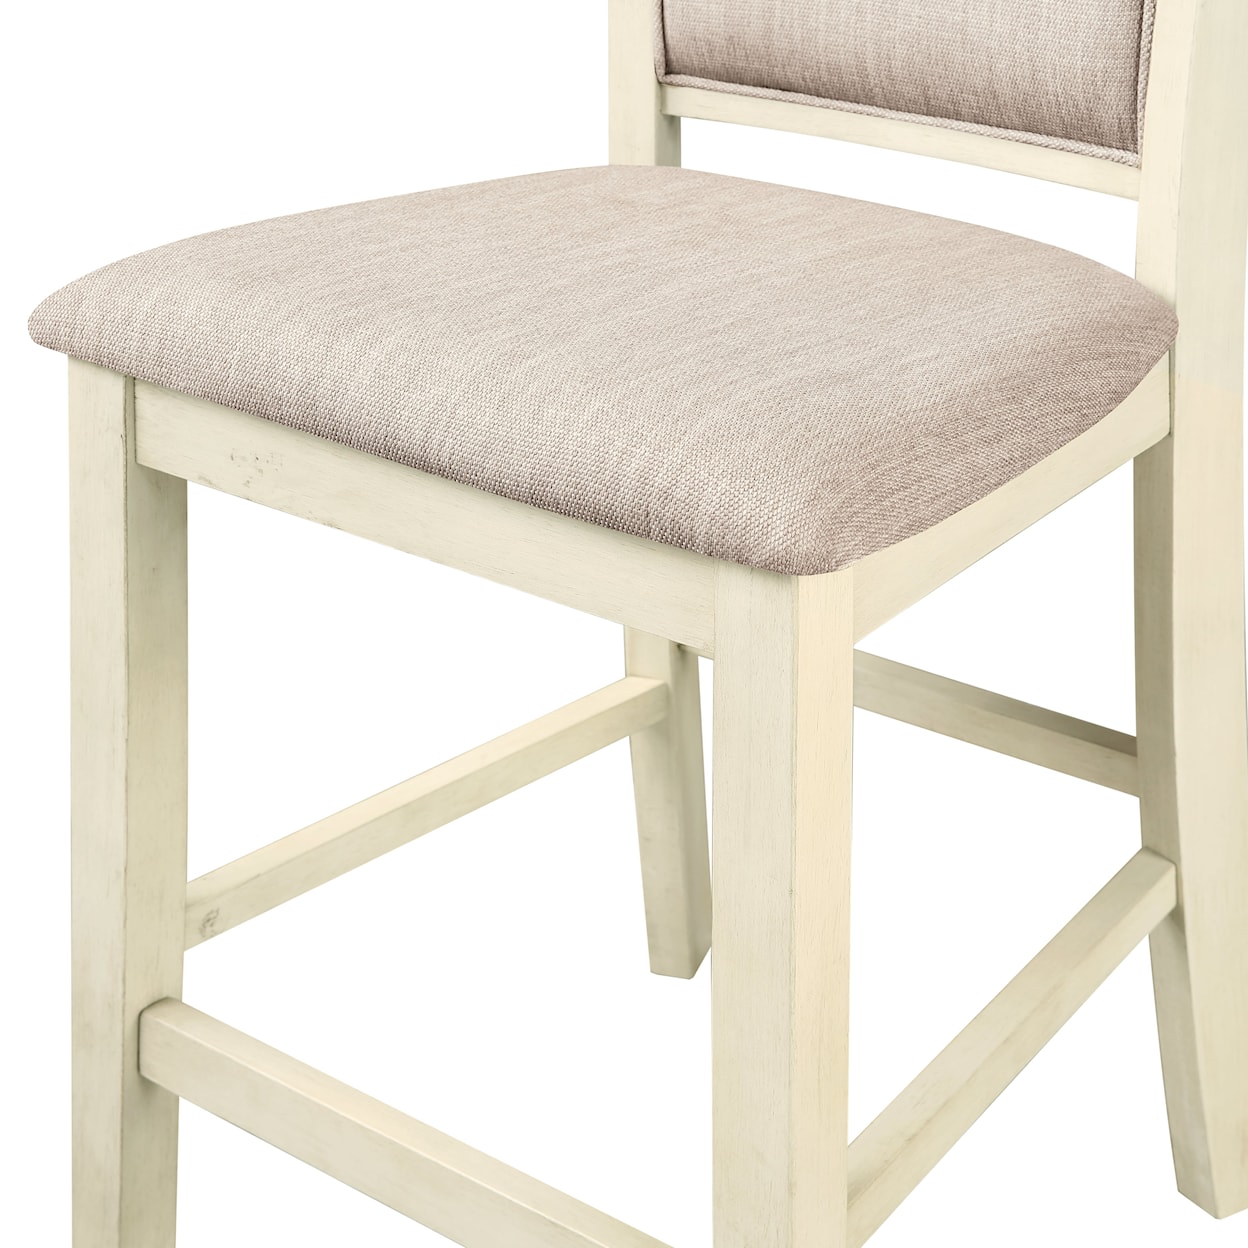 New Classic Amy Counter Chair